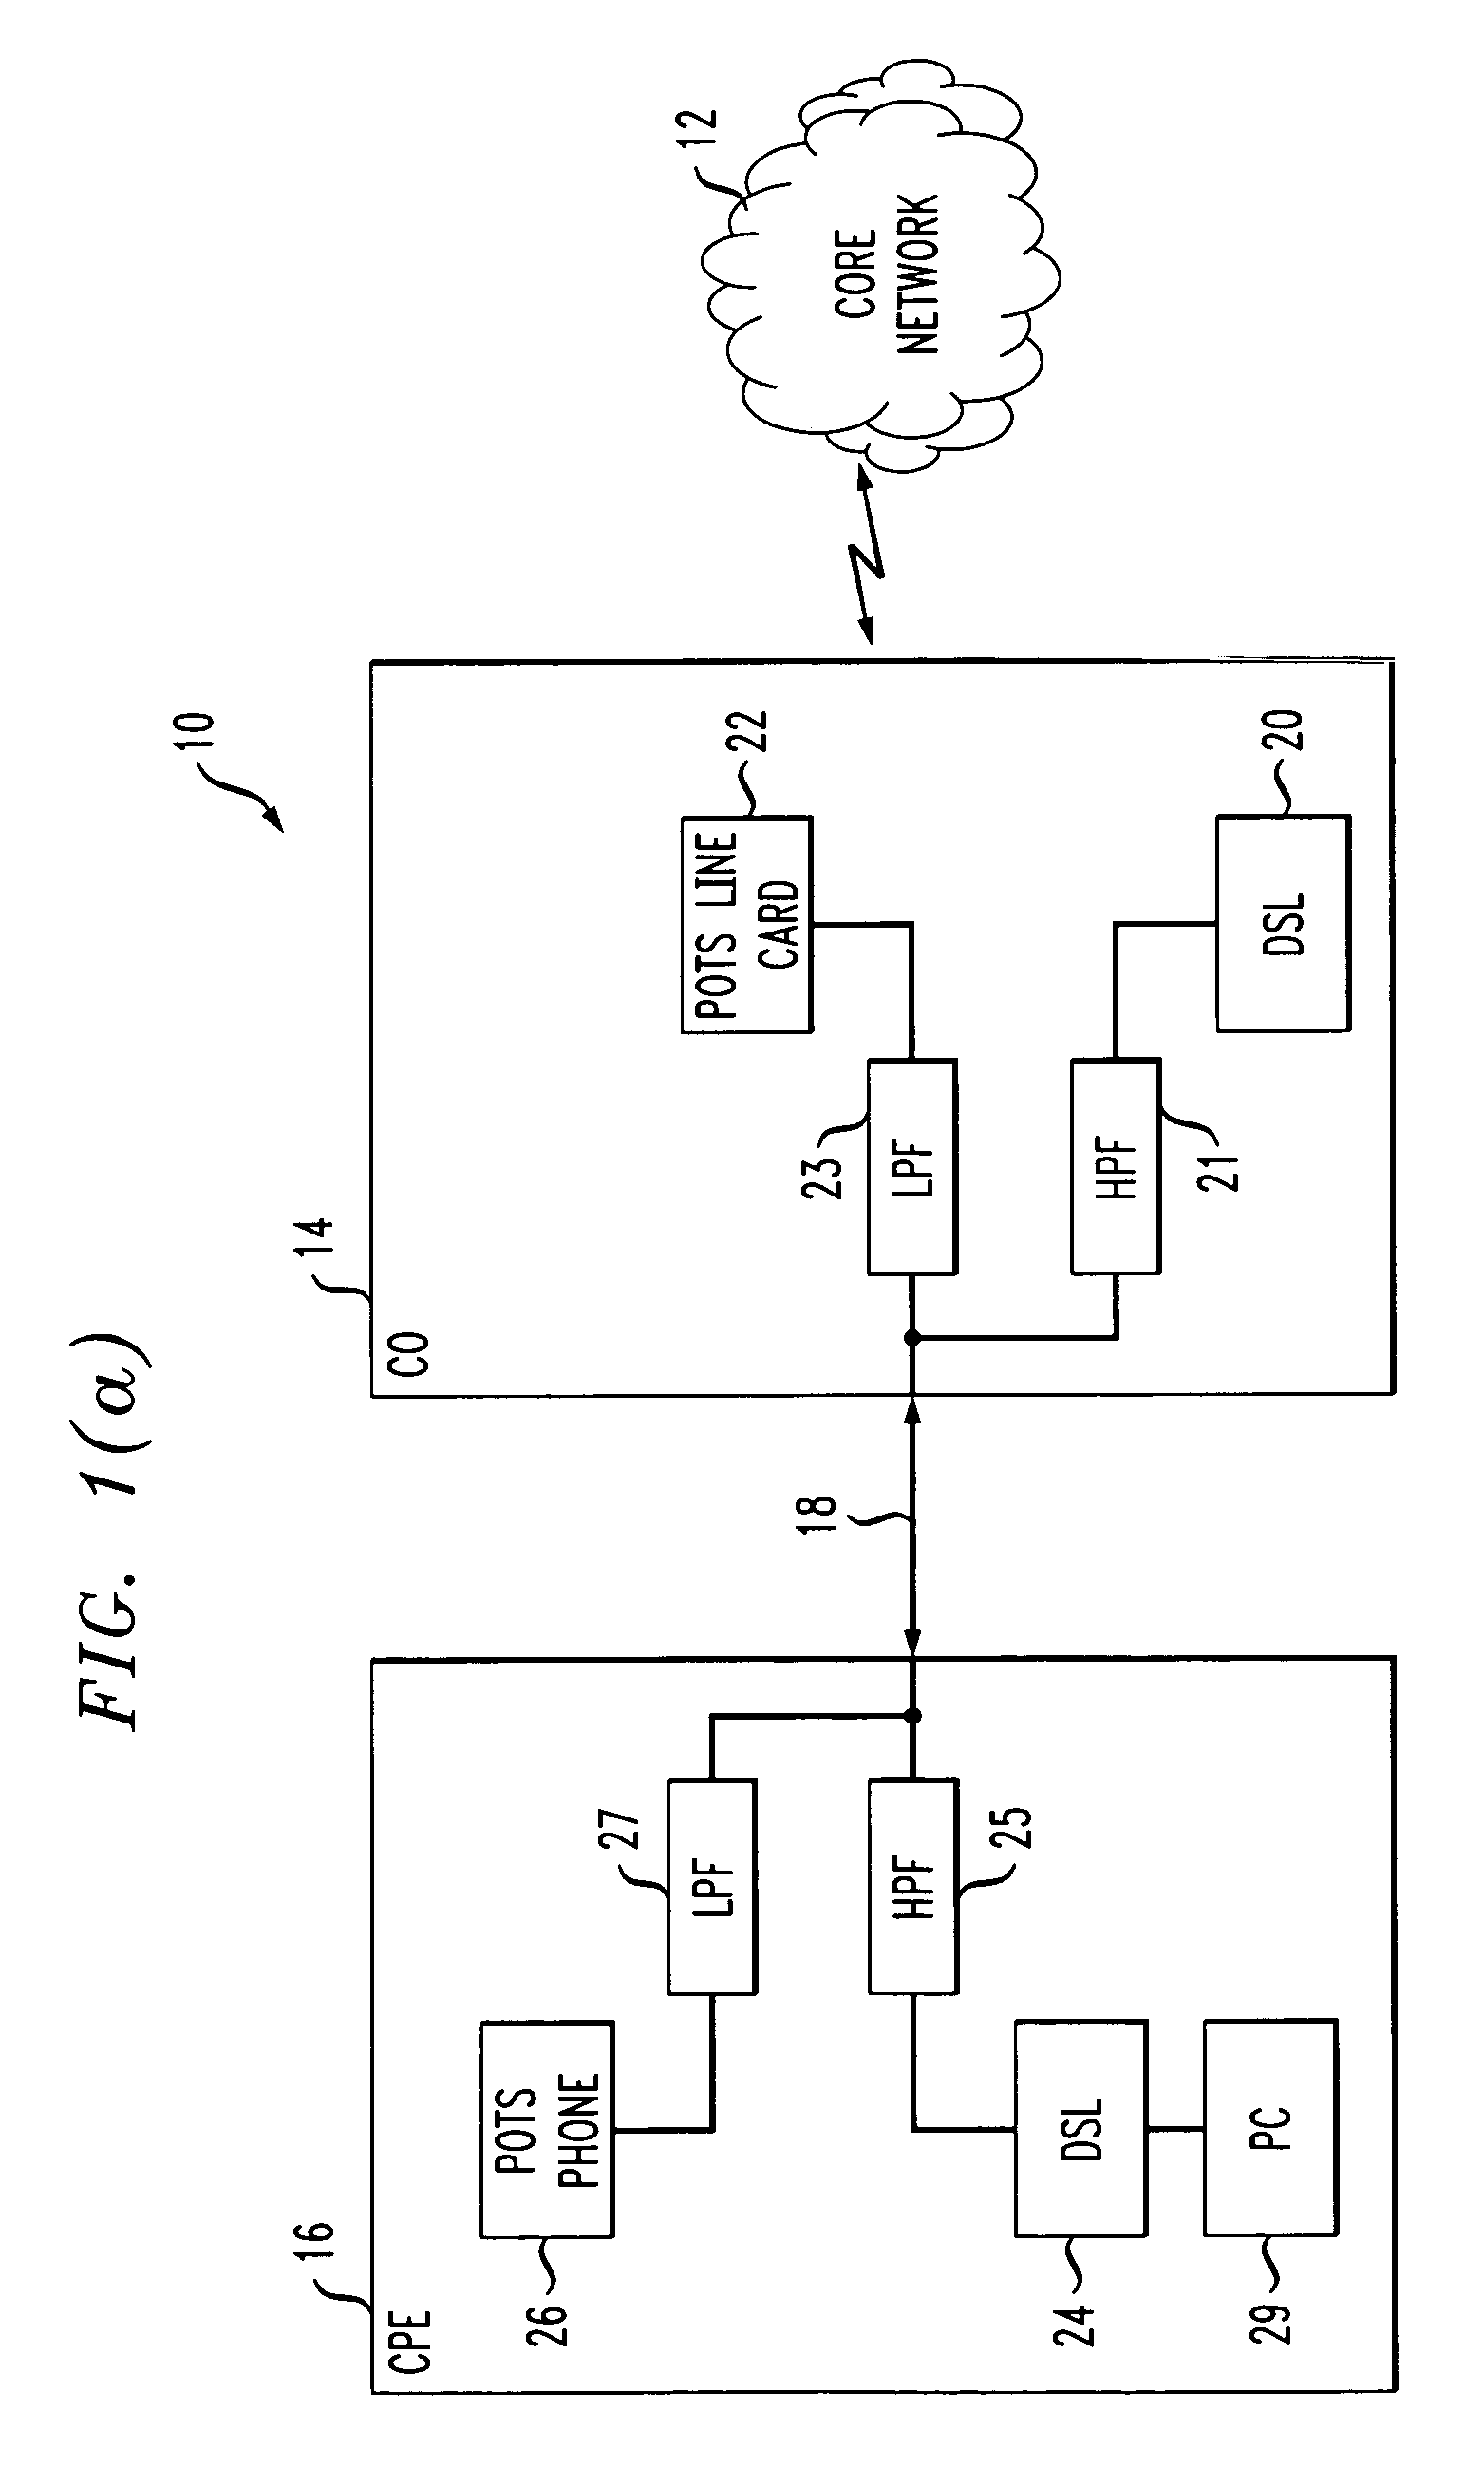 Method and apparatus for selectively terminating current in a digital subscriber line (DSL) modem